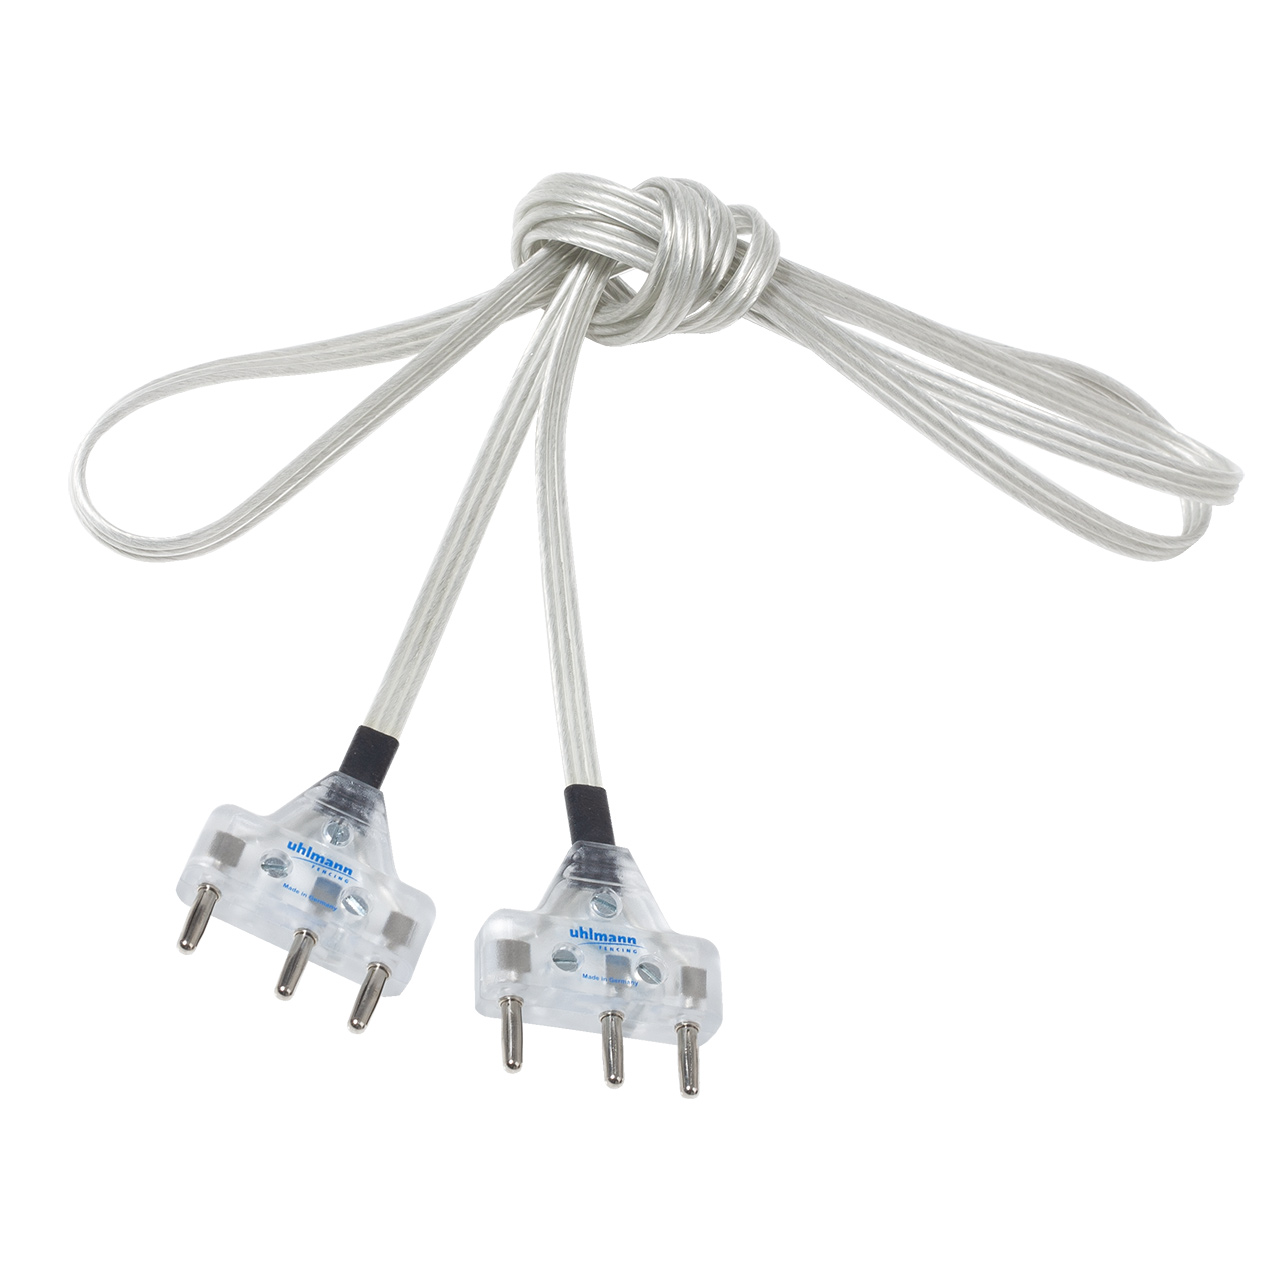 epee body cord "Silver", with transparent cable plugs